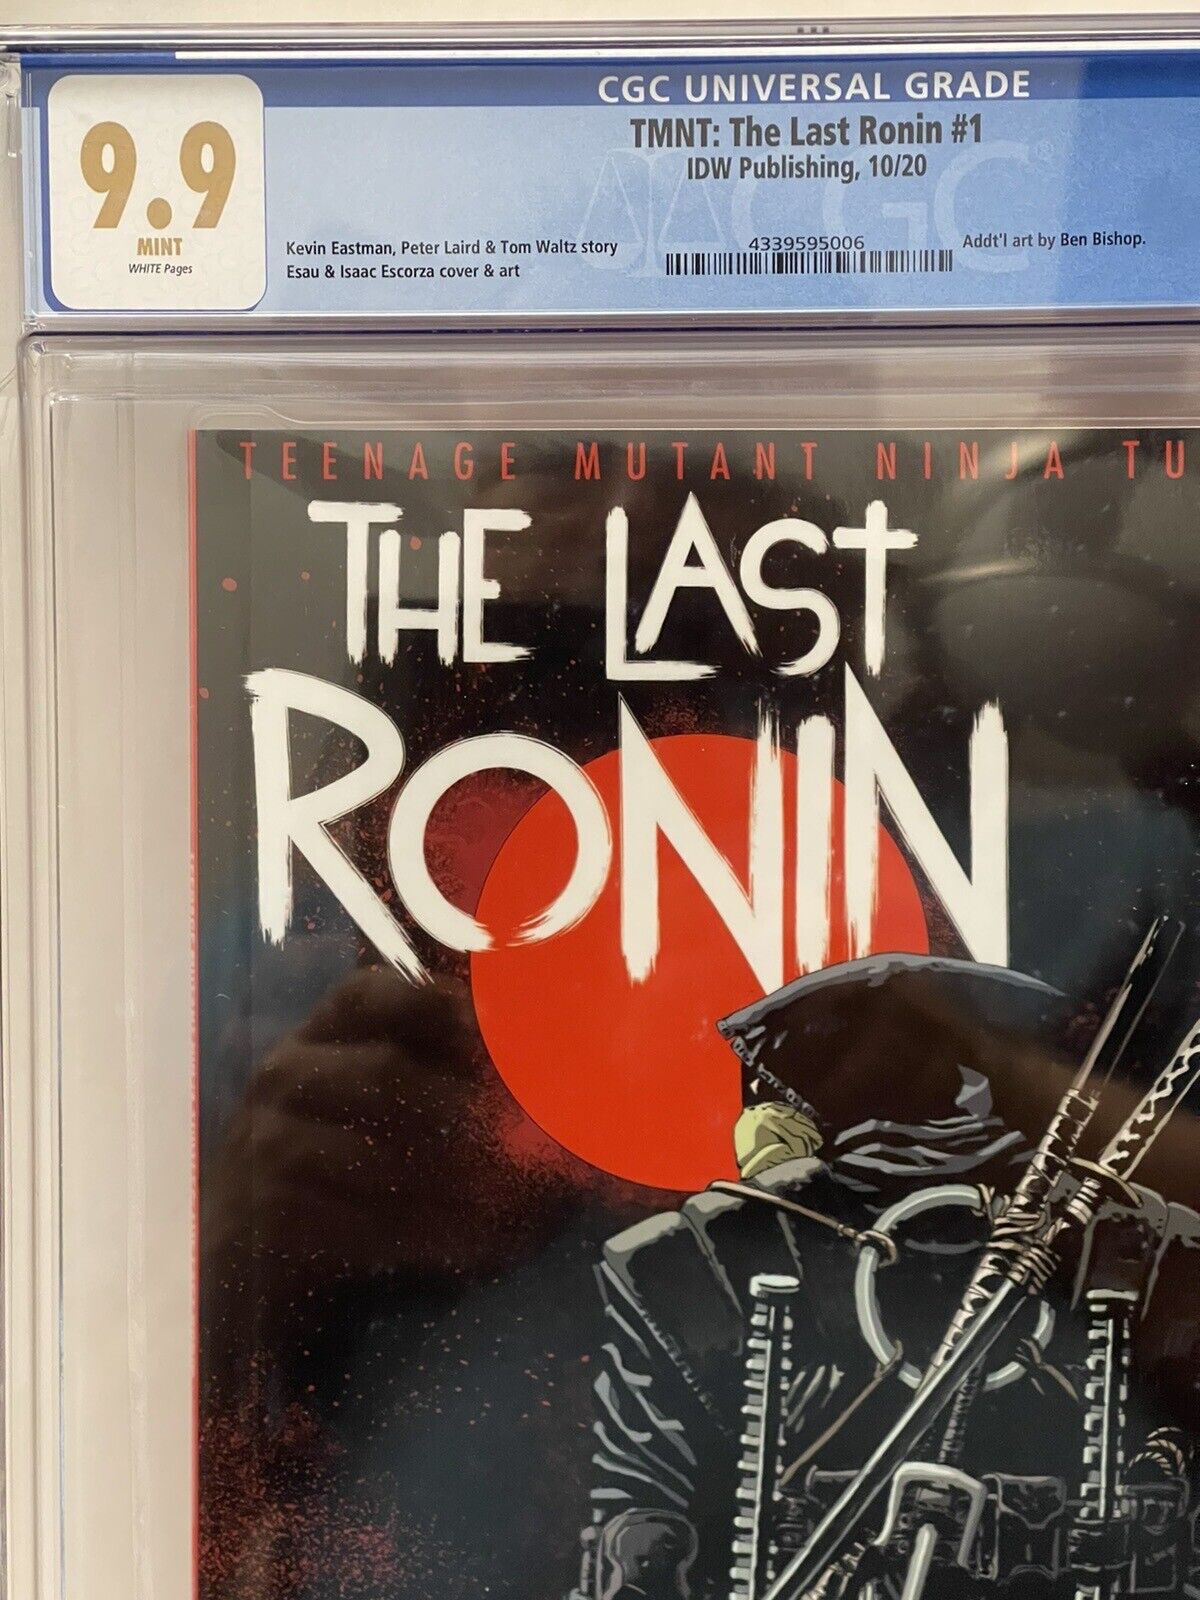 CGC Graded 9.9 TMNT: The Last Ronin #1 Covwr A New Thicker Upgraded Slab